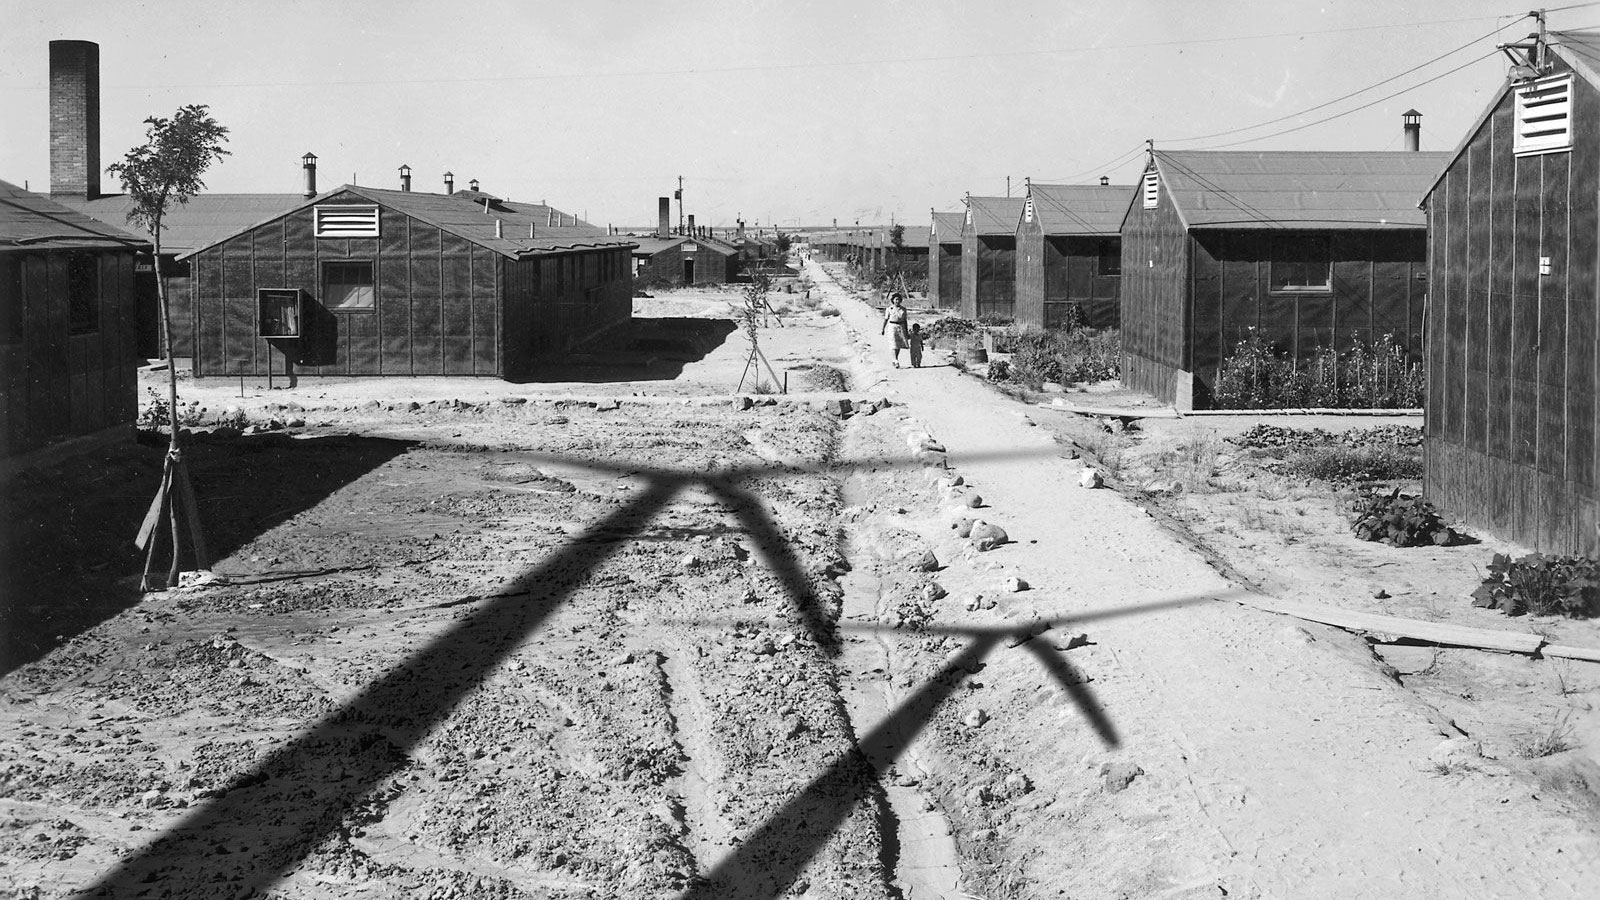 Archival photo of Japanese-American concentration camp Minidoka with Photoshopped wind turbine shadows on top